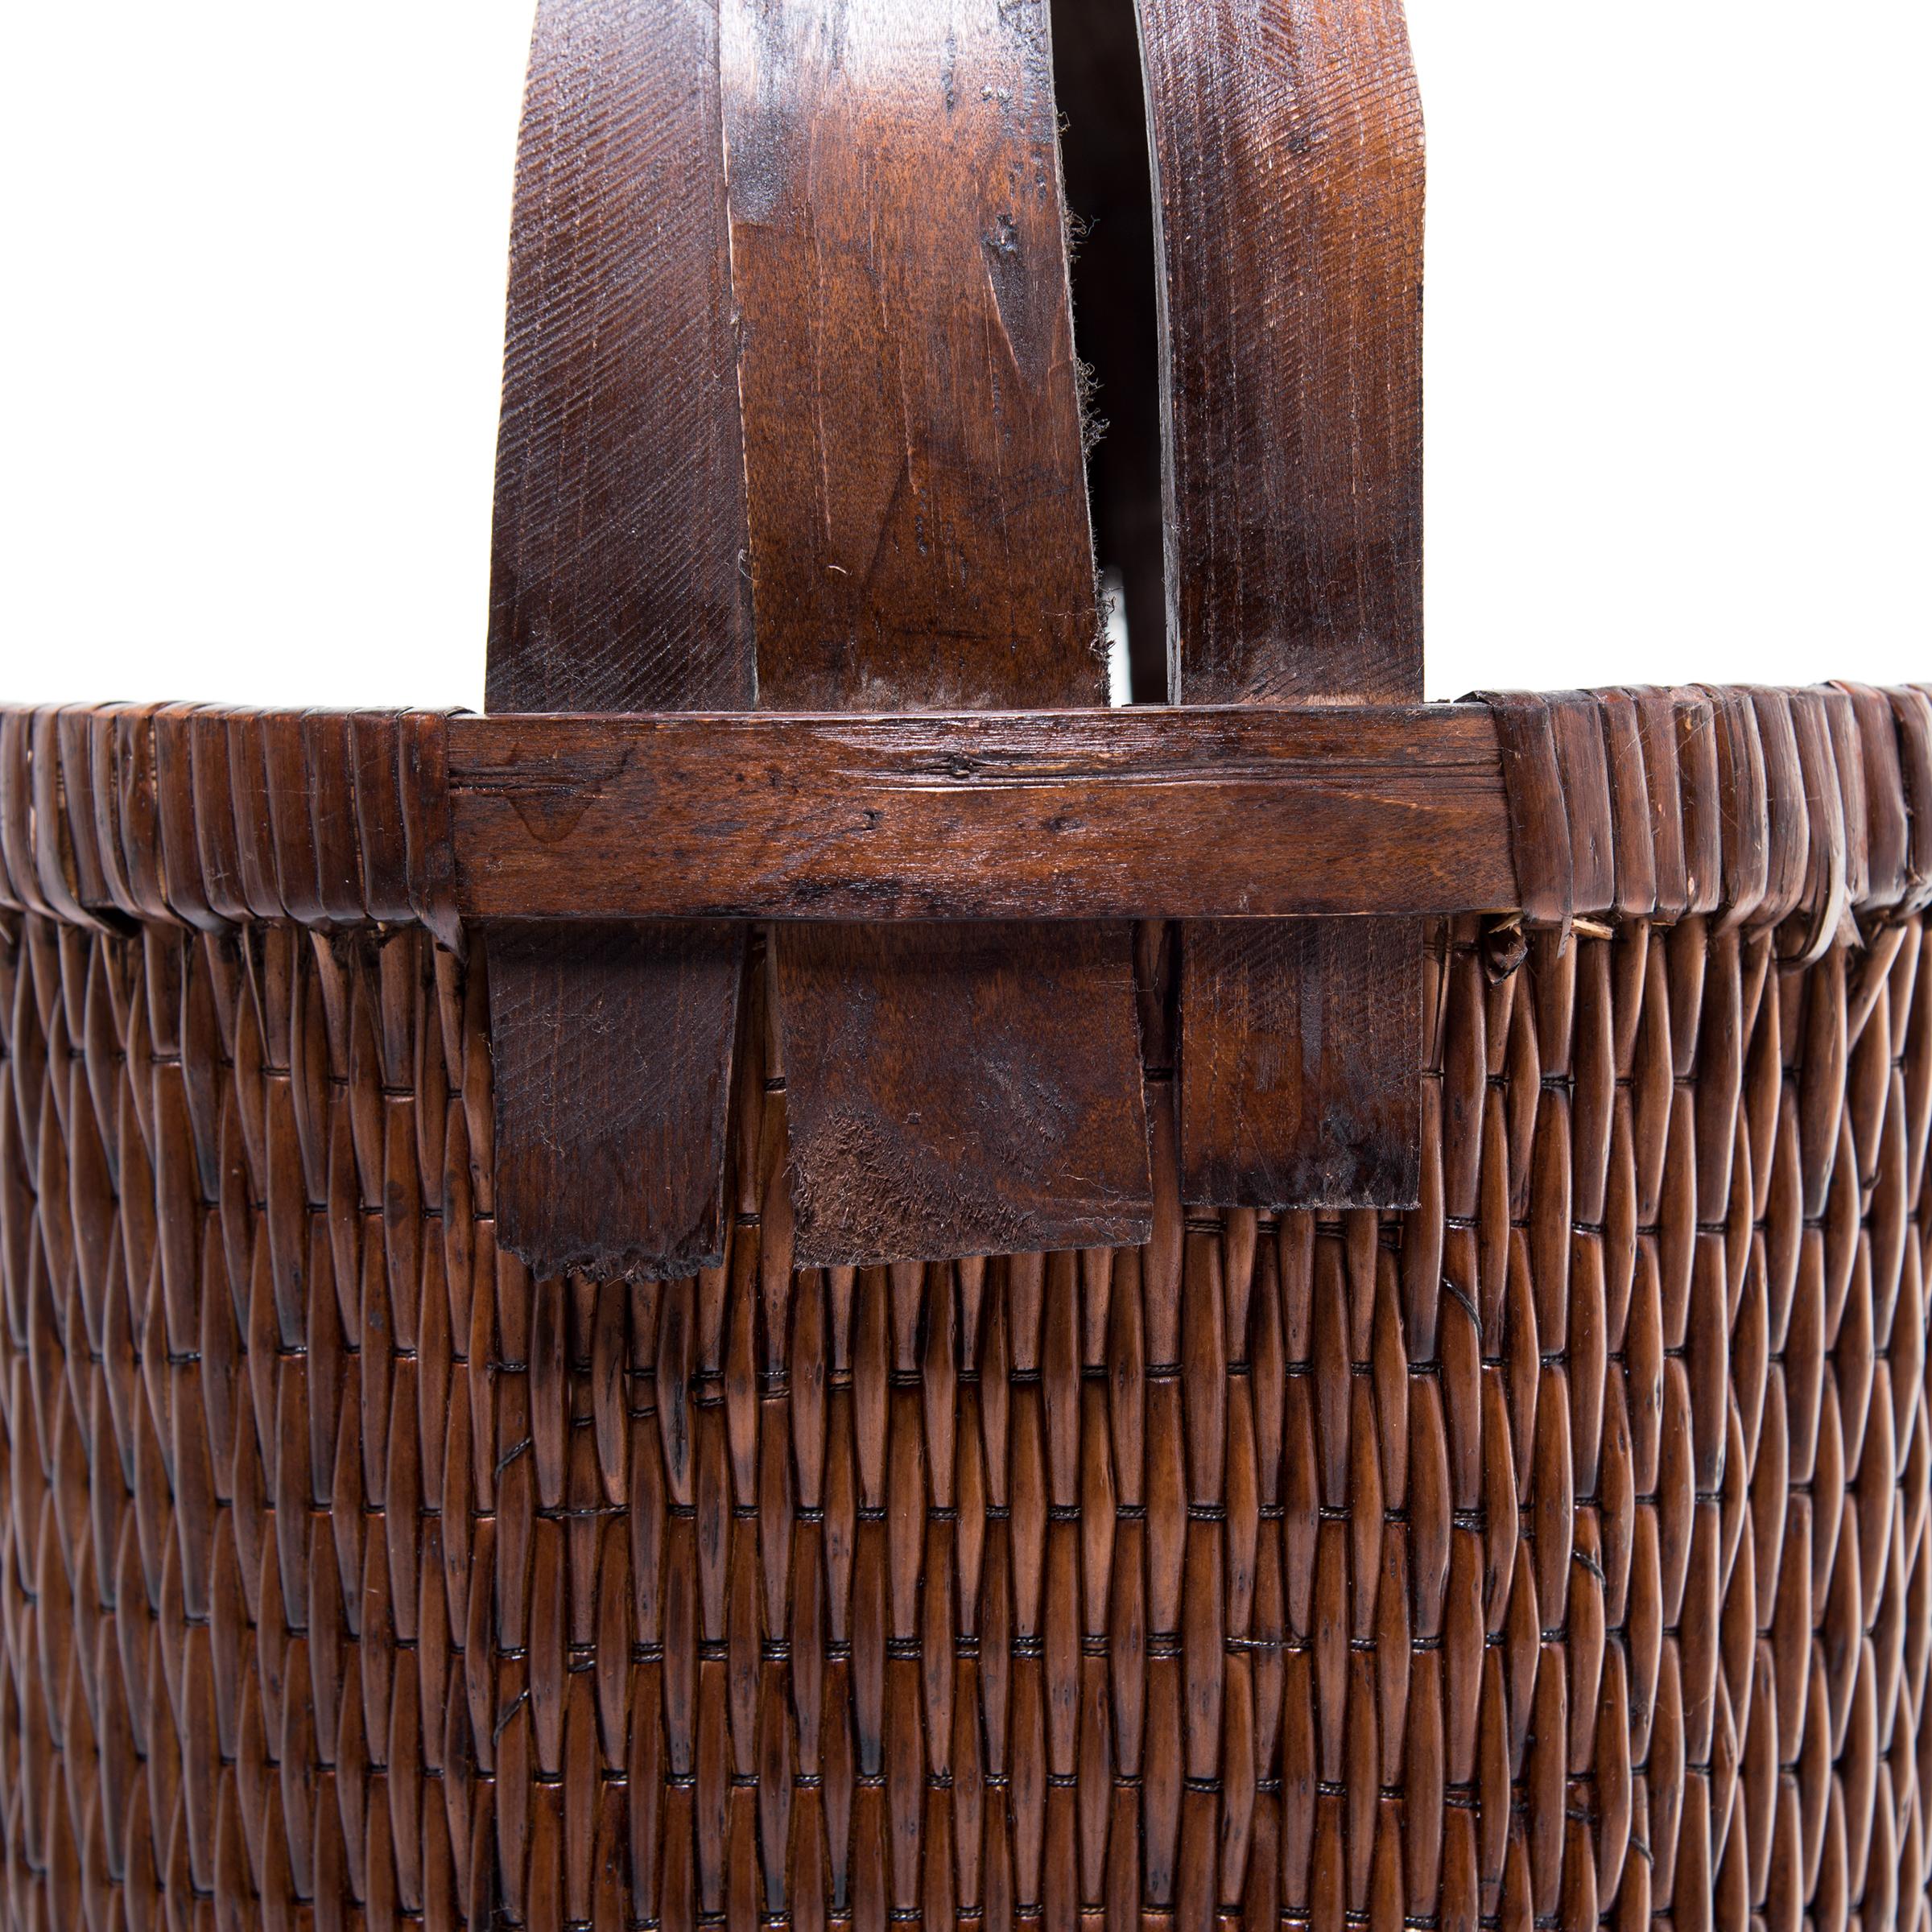 Chinese Bent Handle Fisherman's Basket, c. 1900 In Good Condition For Sale In Chicago, IL